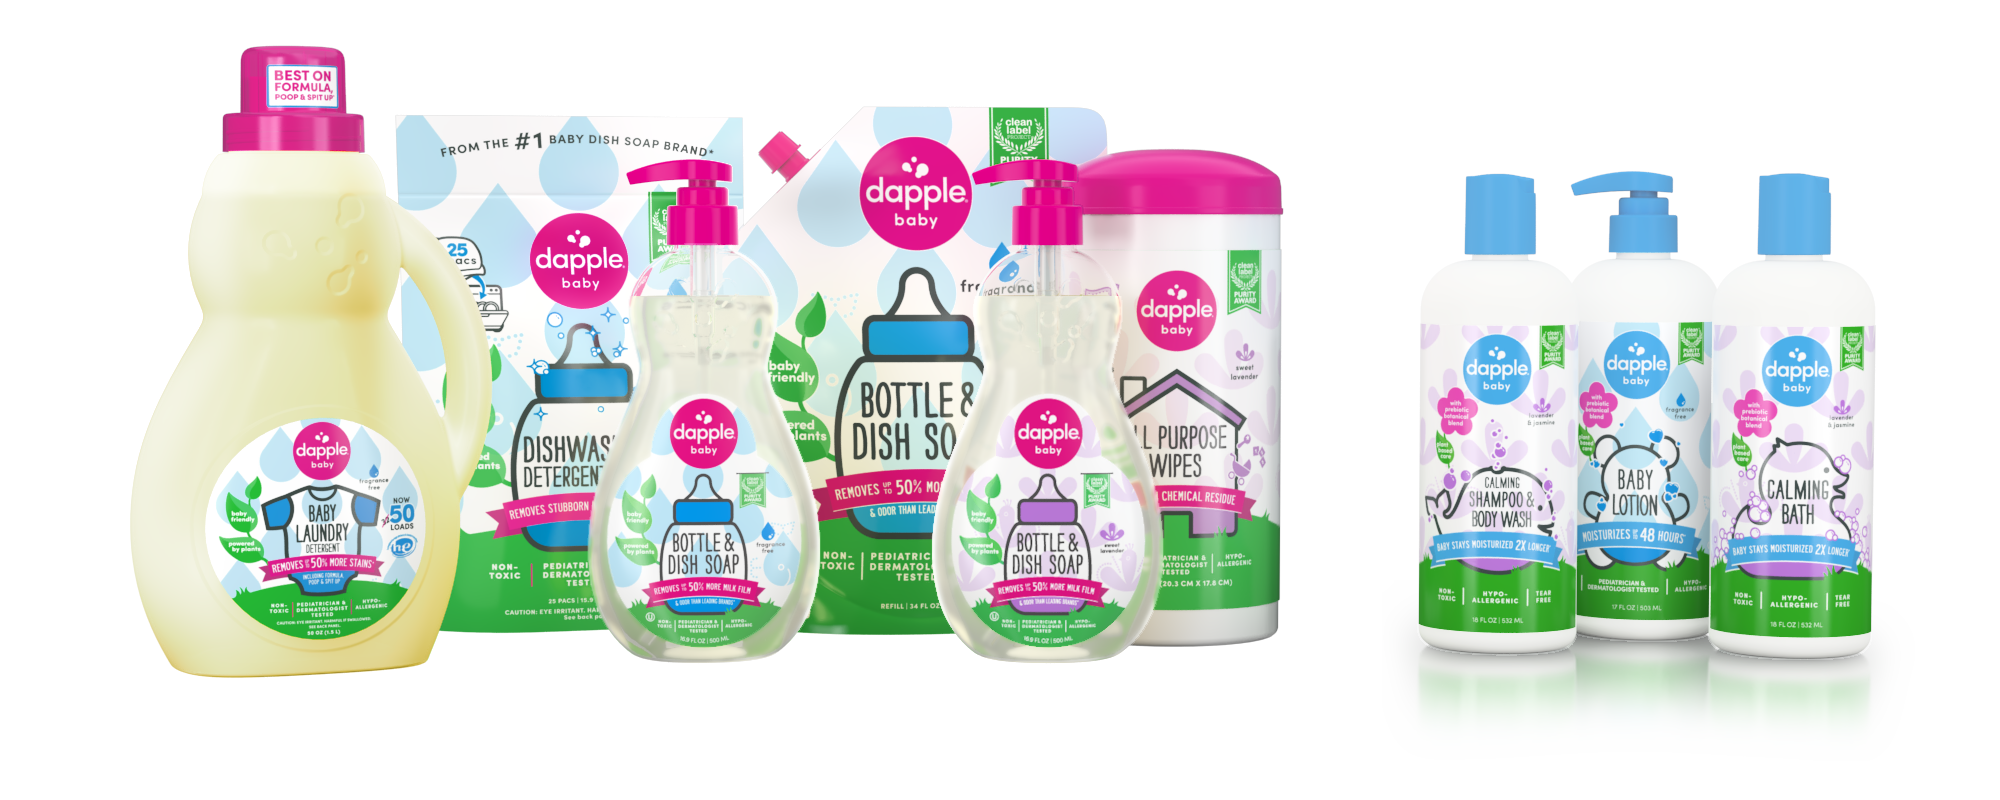 Baby Friendly Cleaning Products - Dapple Baby